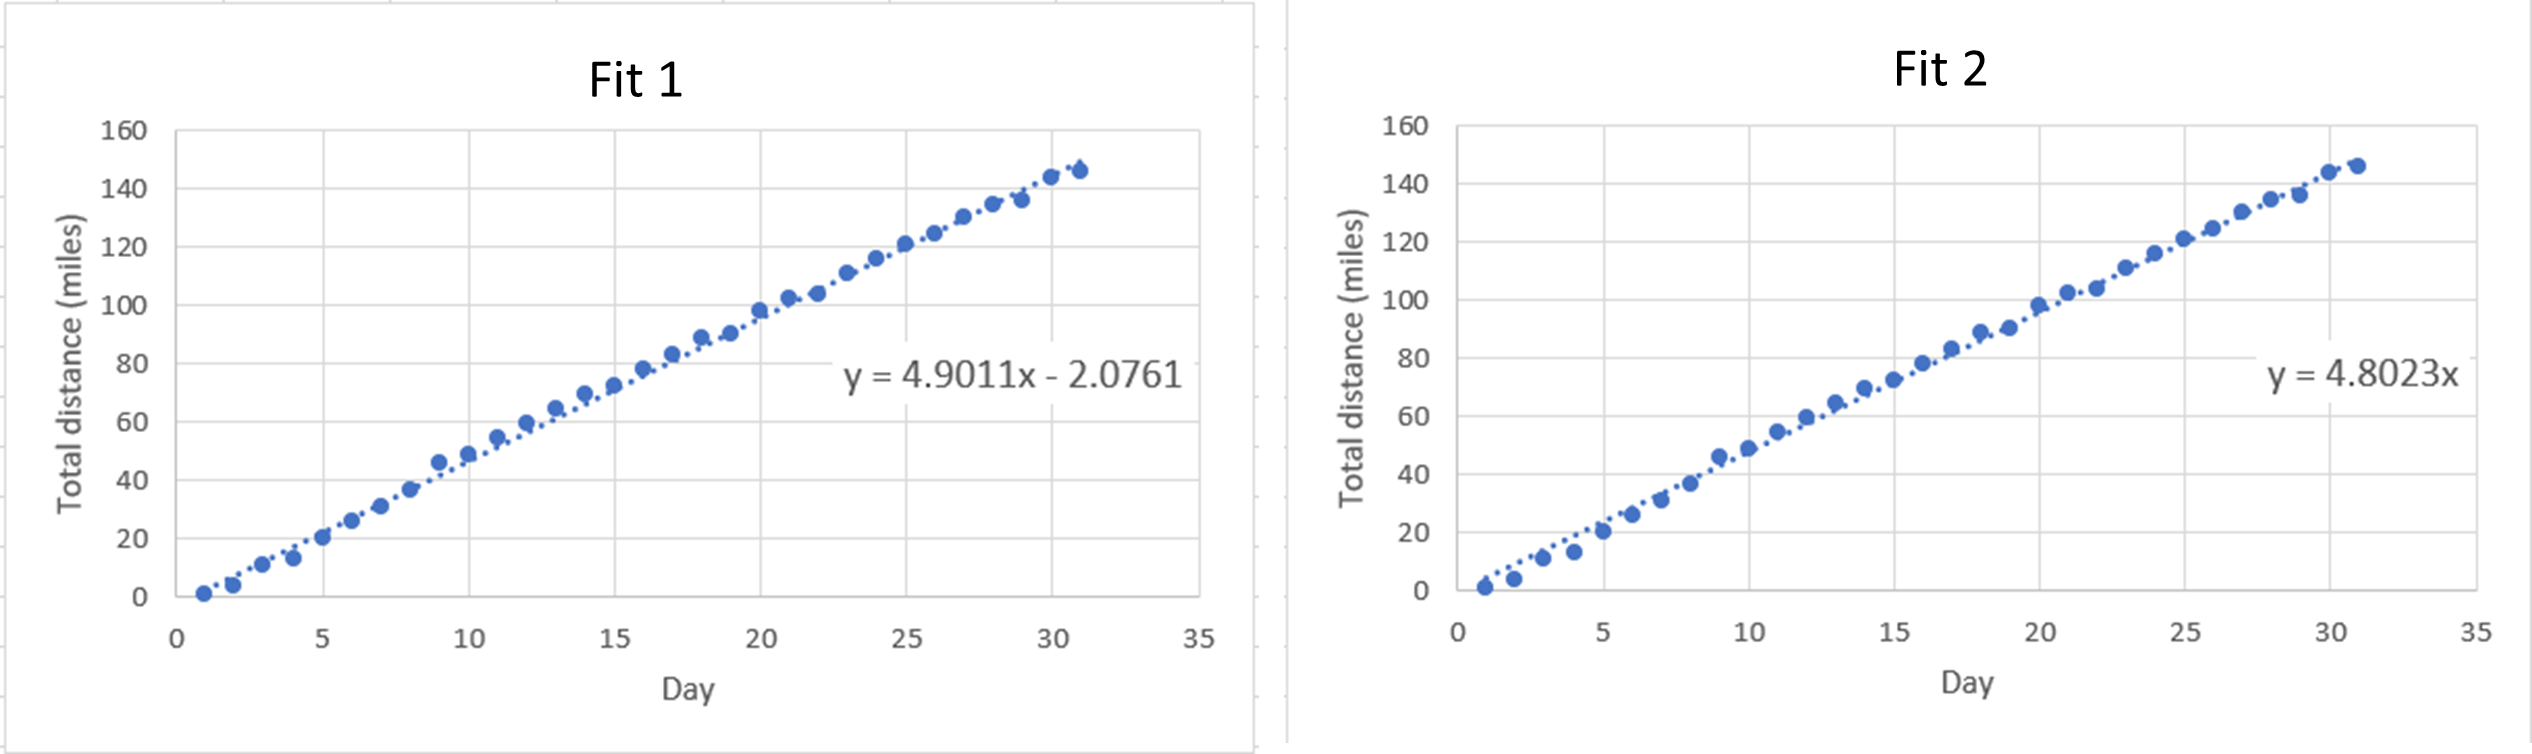 Two graphs, showing two different fits to the same set of data. Graphs are plotted as "total distance (miles)" vs Day. Fit 1 has the equation y = 4.9011x - 2.0761. Fit 2 has the equation y = 4.8023x.